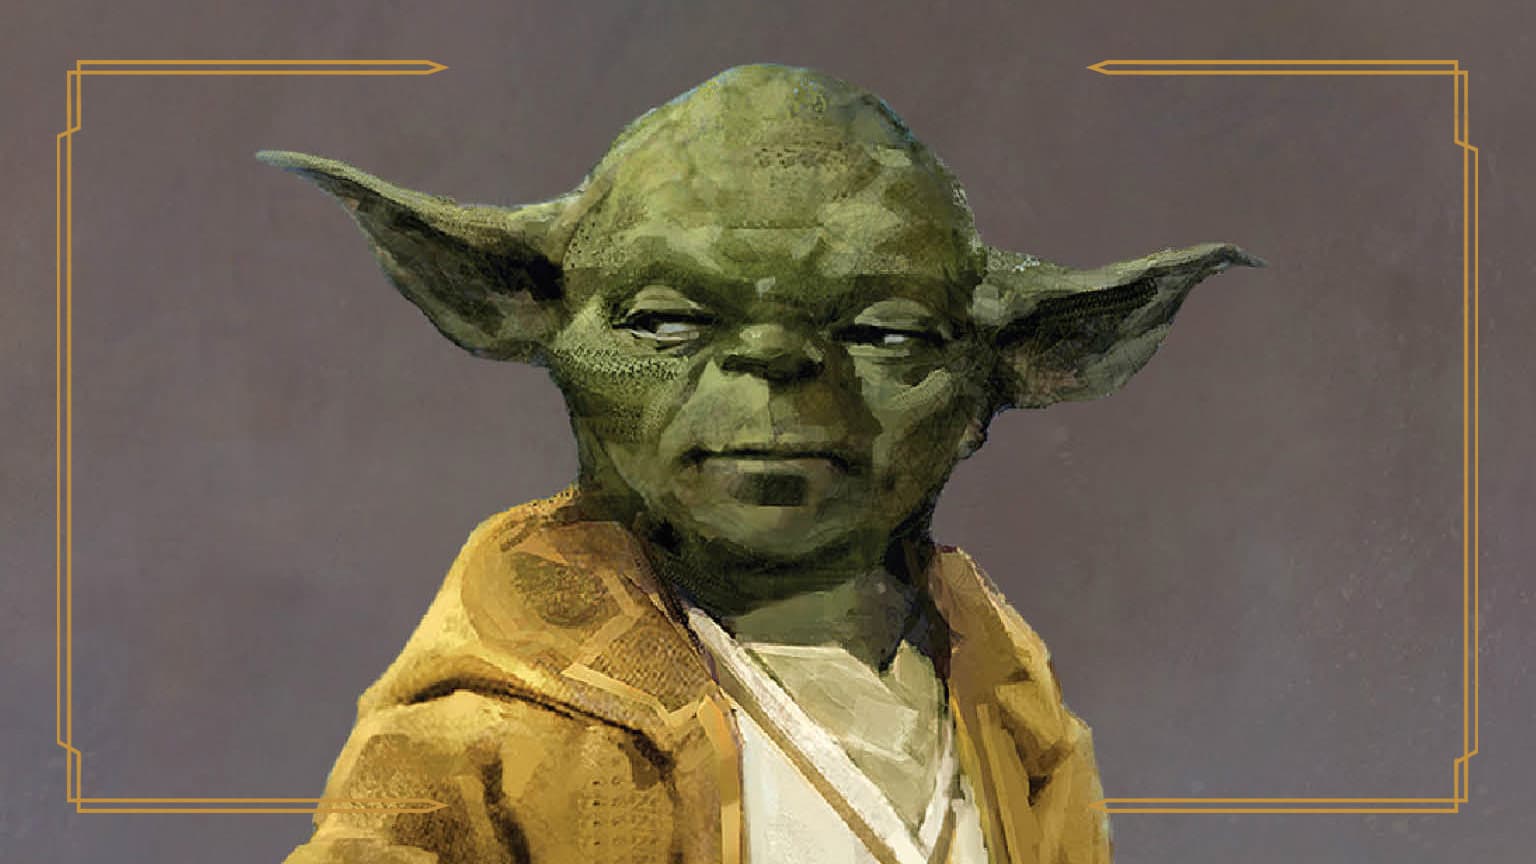 Star Wars: The High Republic Reveals Yoda Will Be A Part Of The Series With Exciting New Concept Art